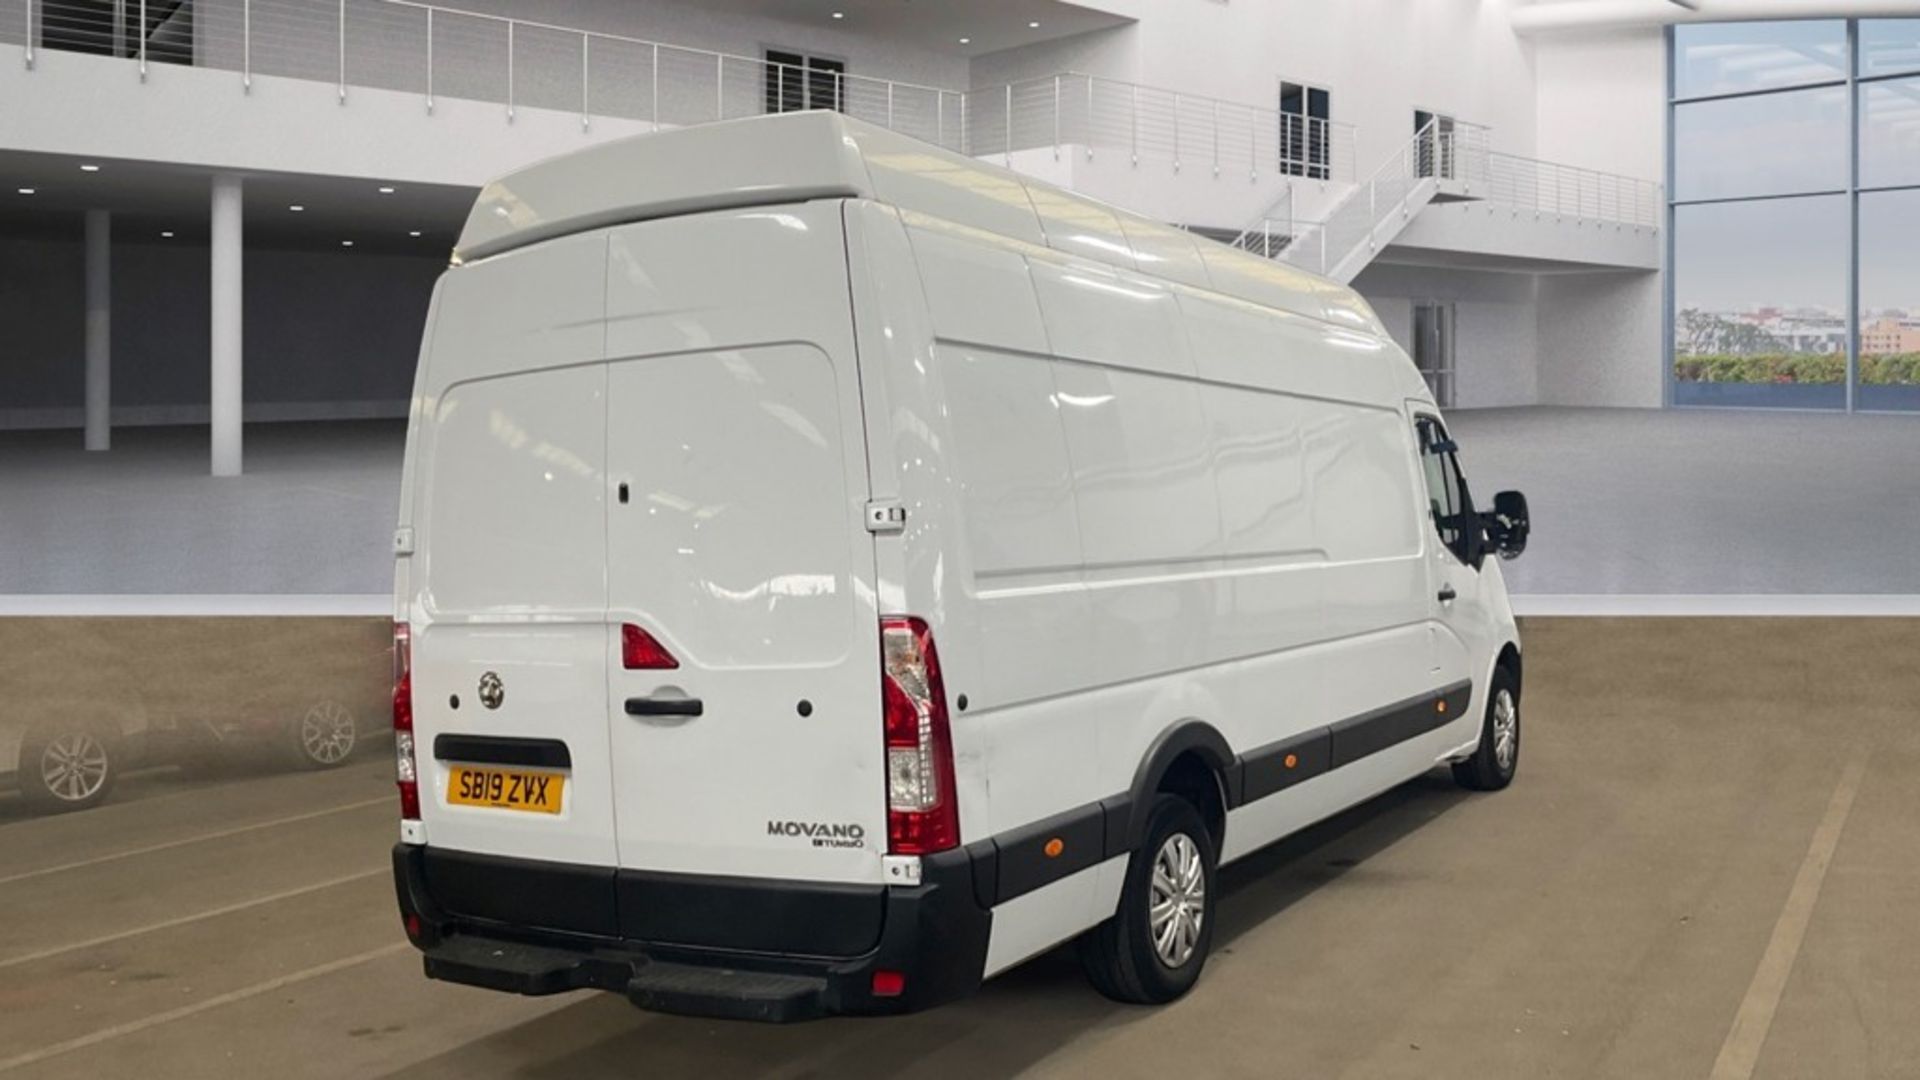 ** ON SALE ** Vauxhall Movano 3500 RWDS 2.3 CDTI 145 L4 H3 2019 '19 Reg' - Only 56,125 miles - A/C - Image 5 of 8